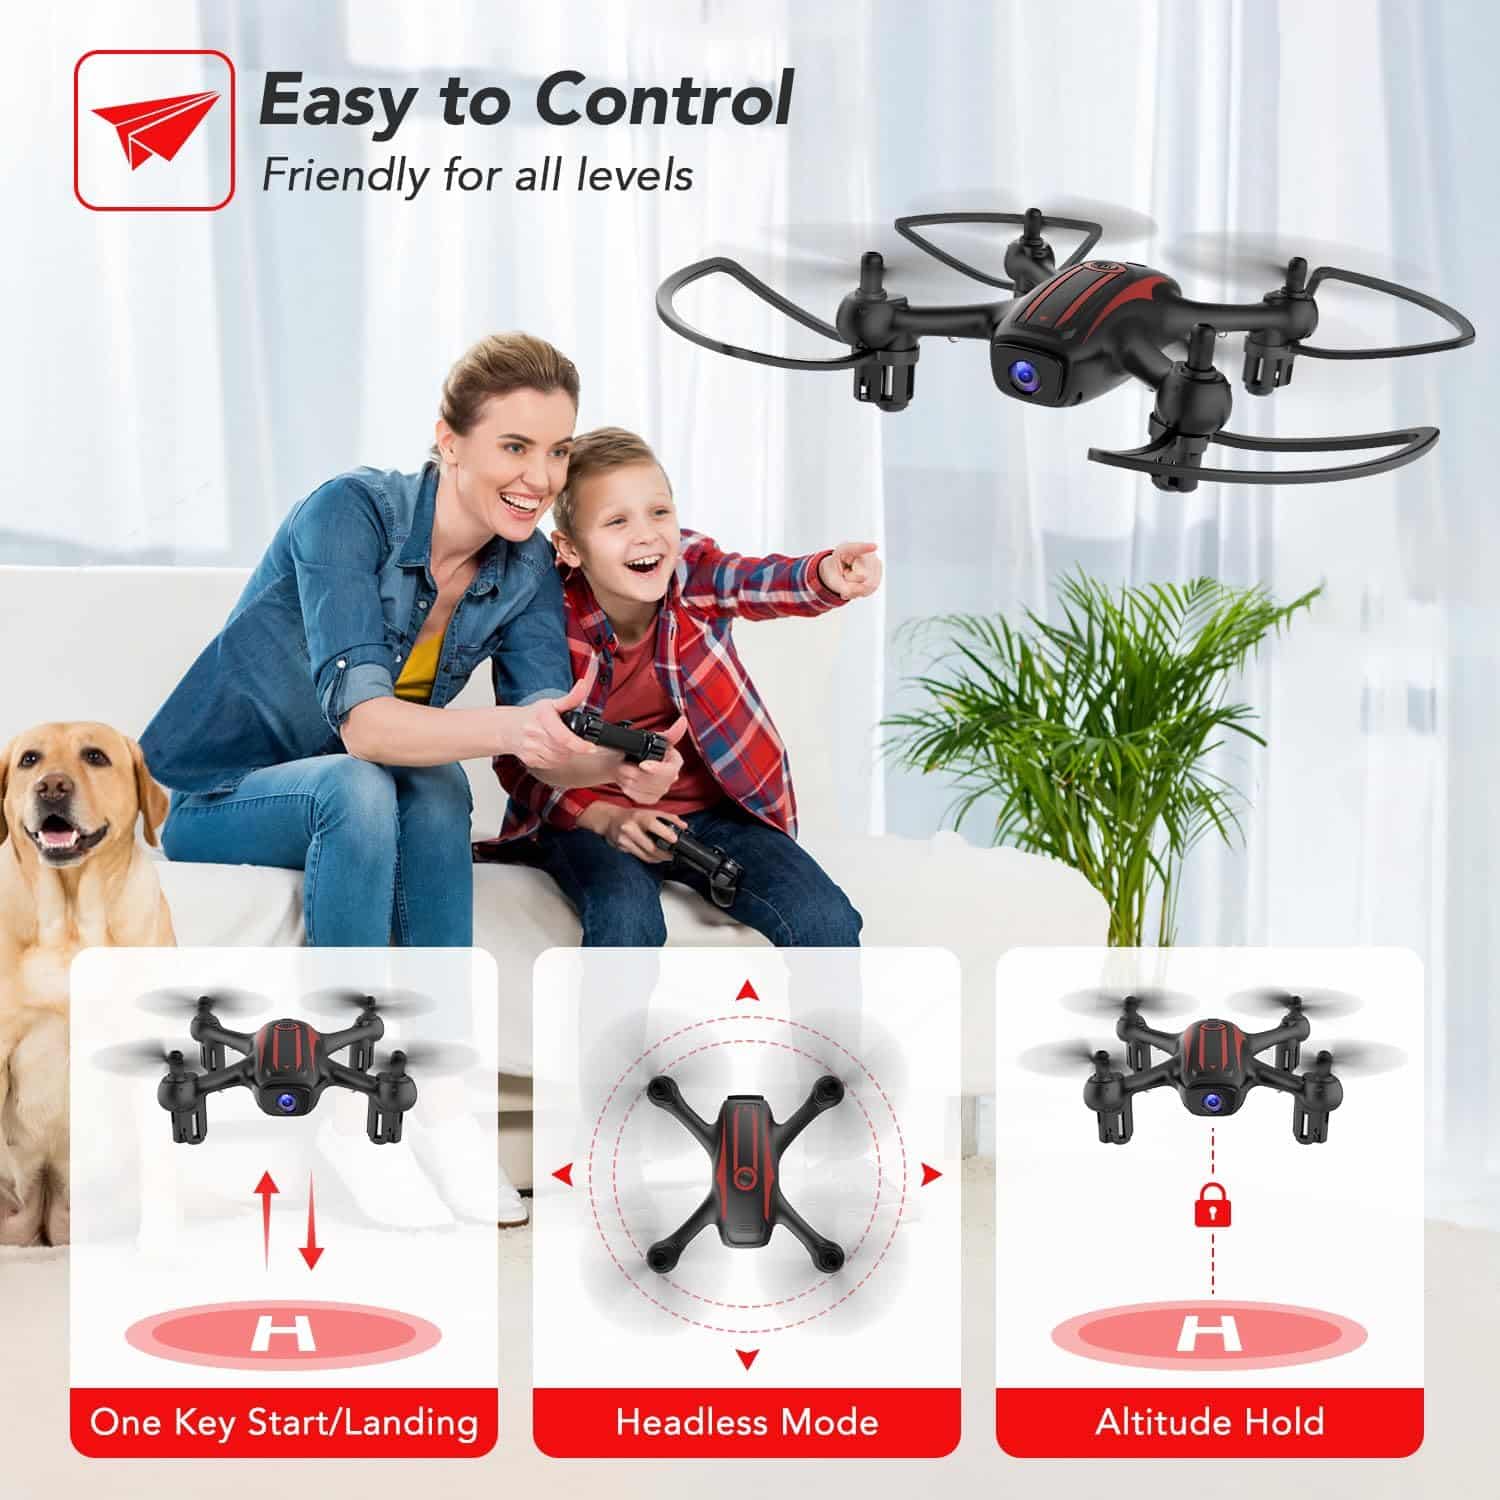 Elukiko Drone with Camera for Adults Kids: A Review of the Ultimate Flying Experience